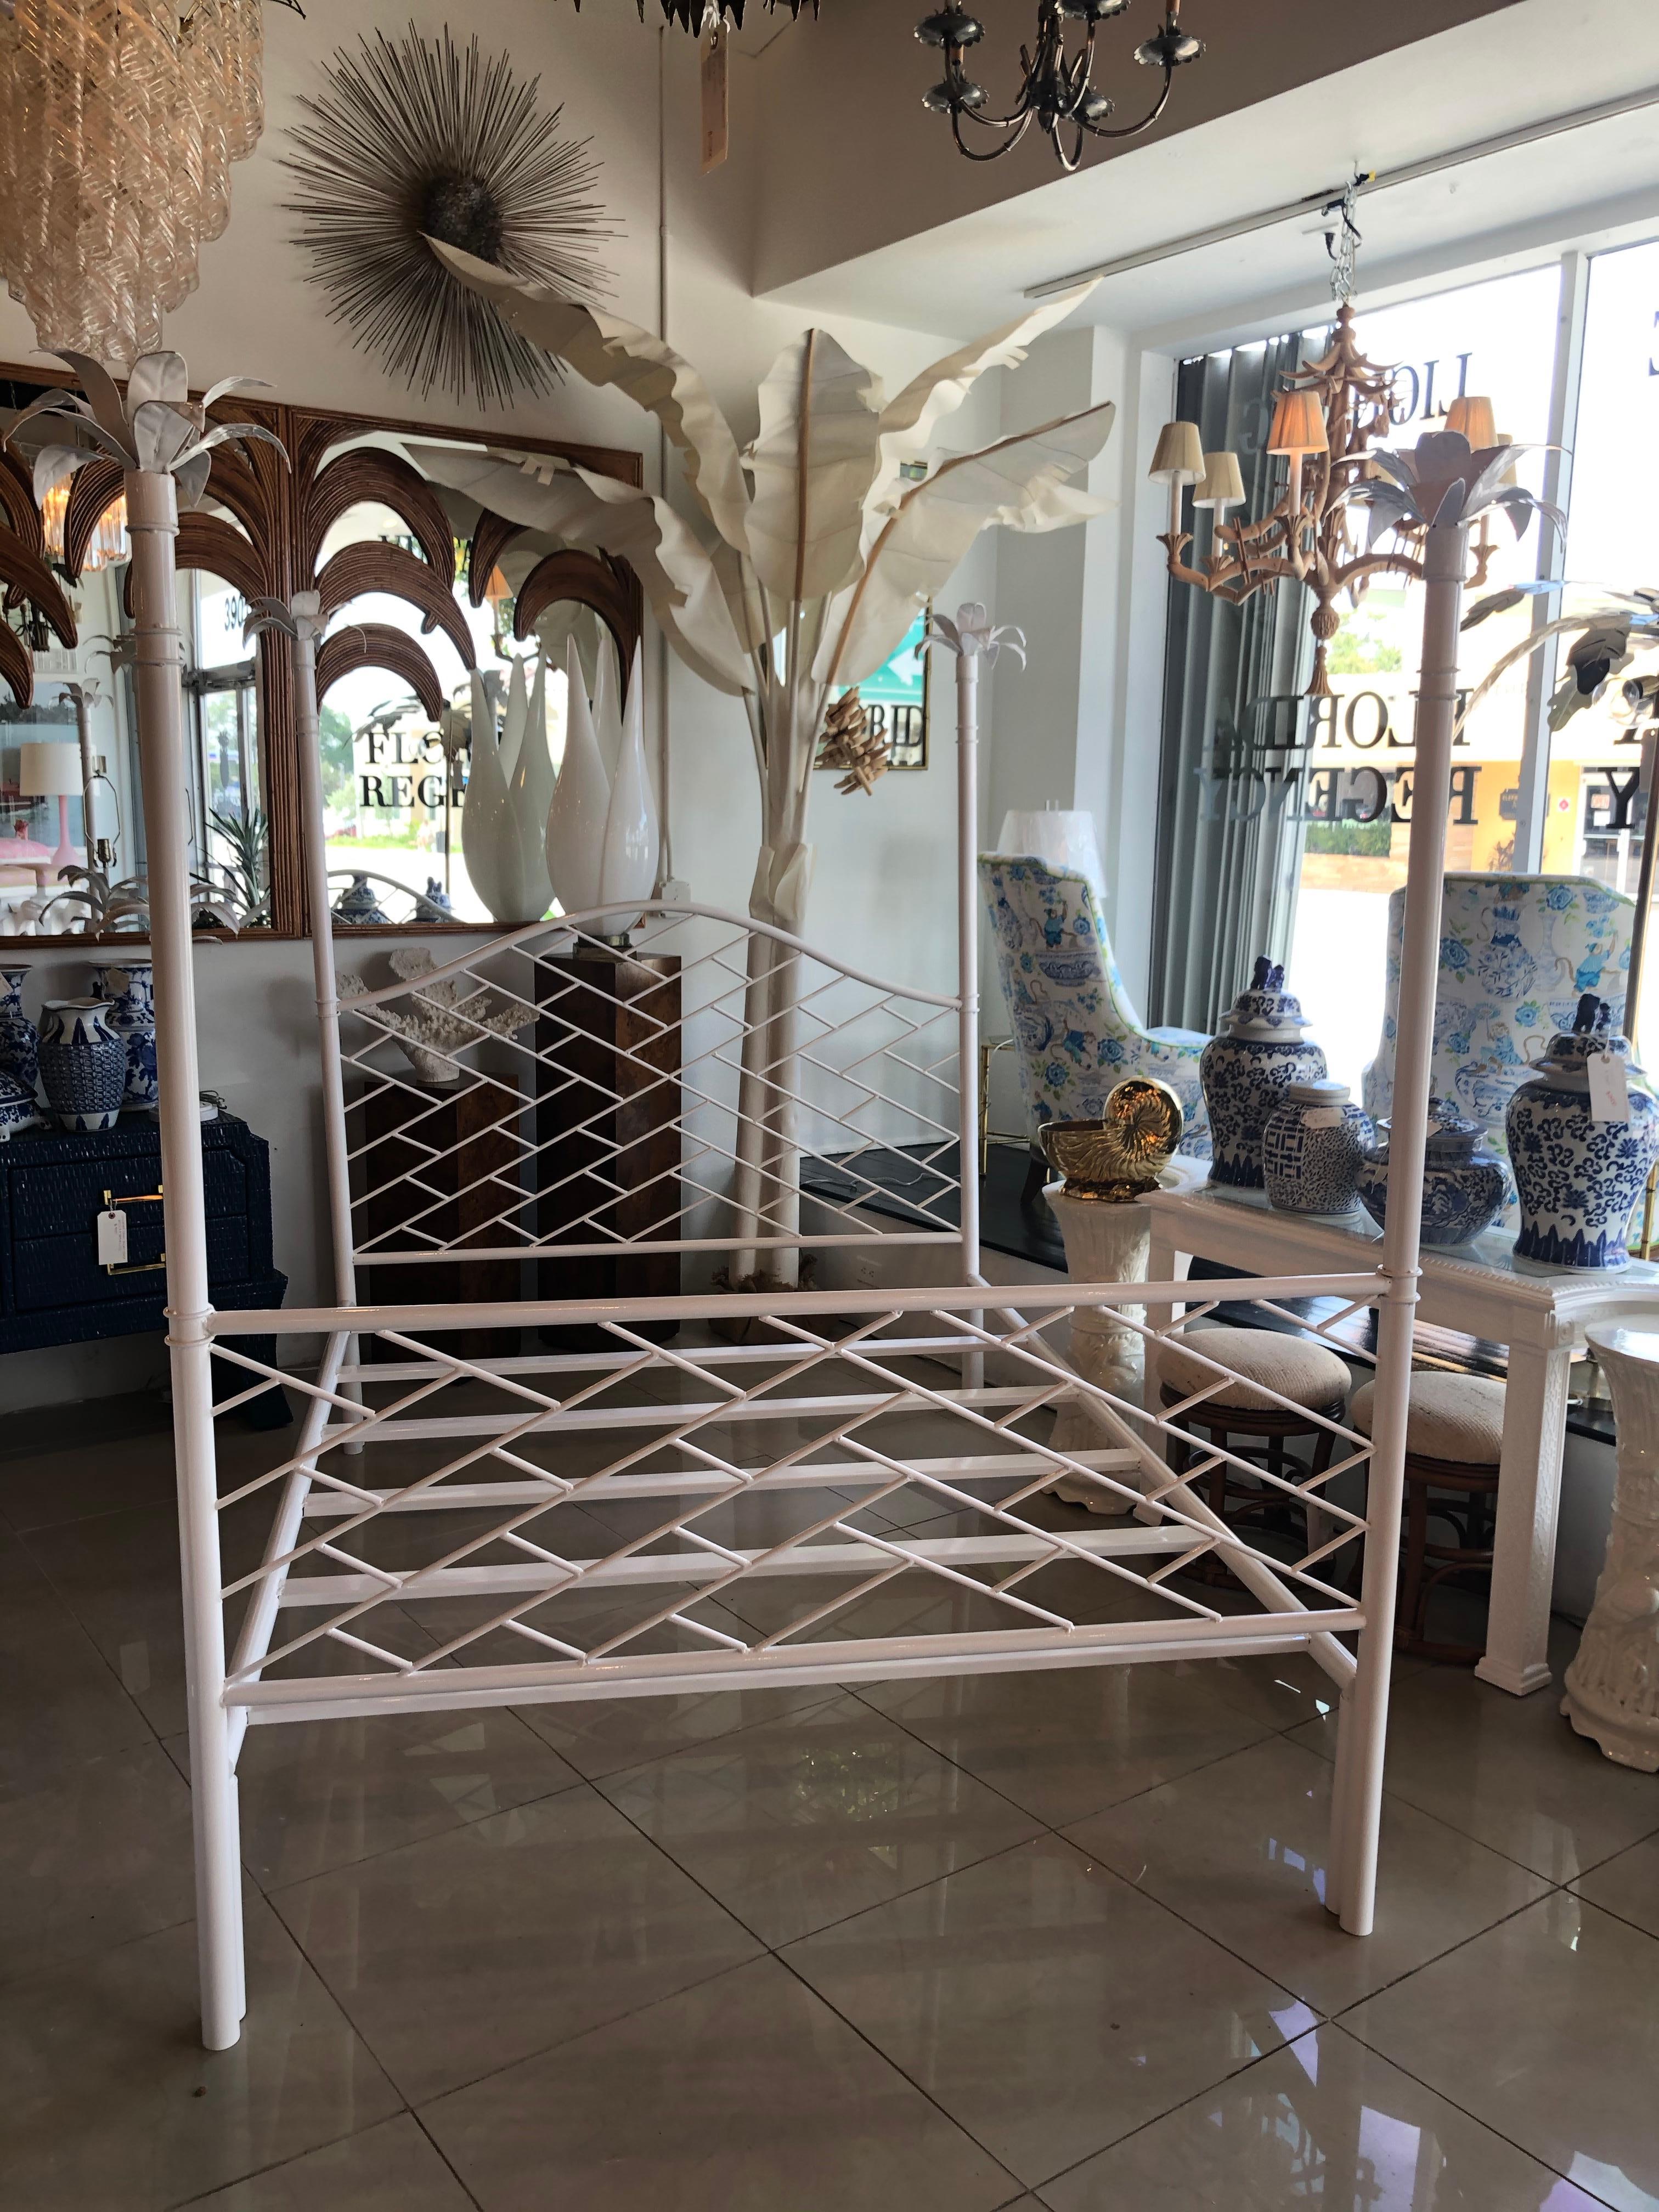 Amazing vintage Chinese Chippendale queen or full size four poster bed post bed. Palm tree leaf finials. All metal, newly powdercoated in a white gloss finish. Includes headboard, footboard, and mattress rails. The finials add to the overall size